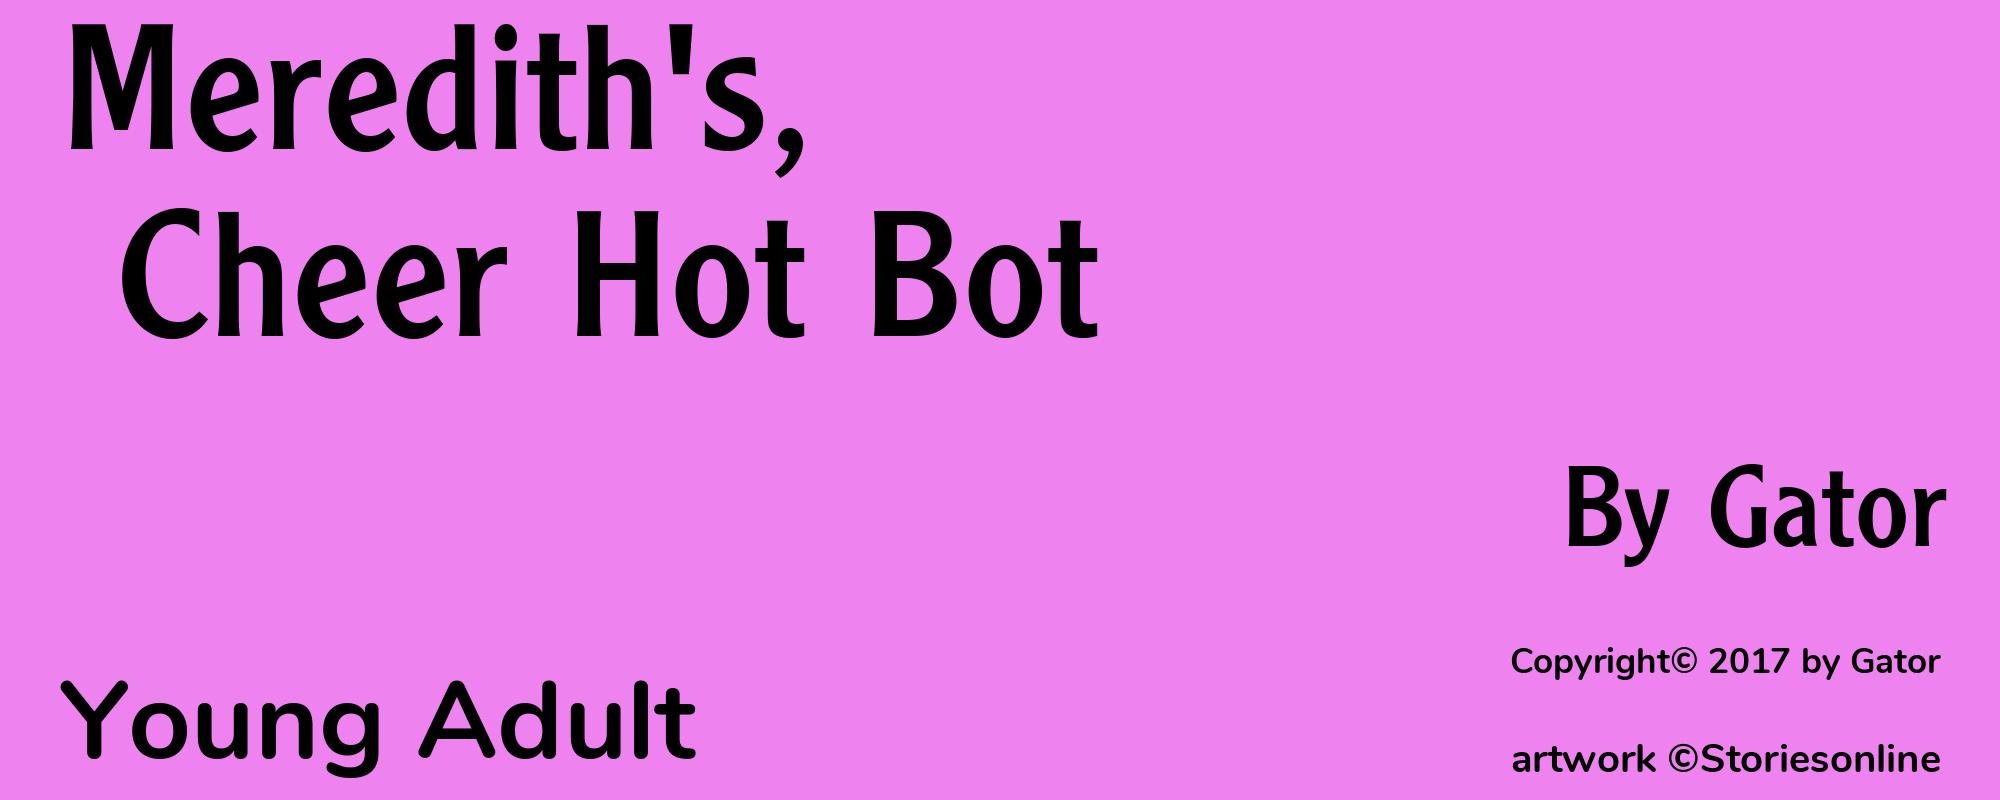 Meredith's, Cheer Hot Bot - Cover